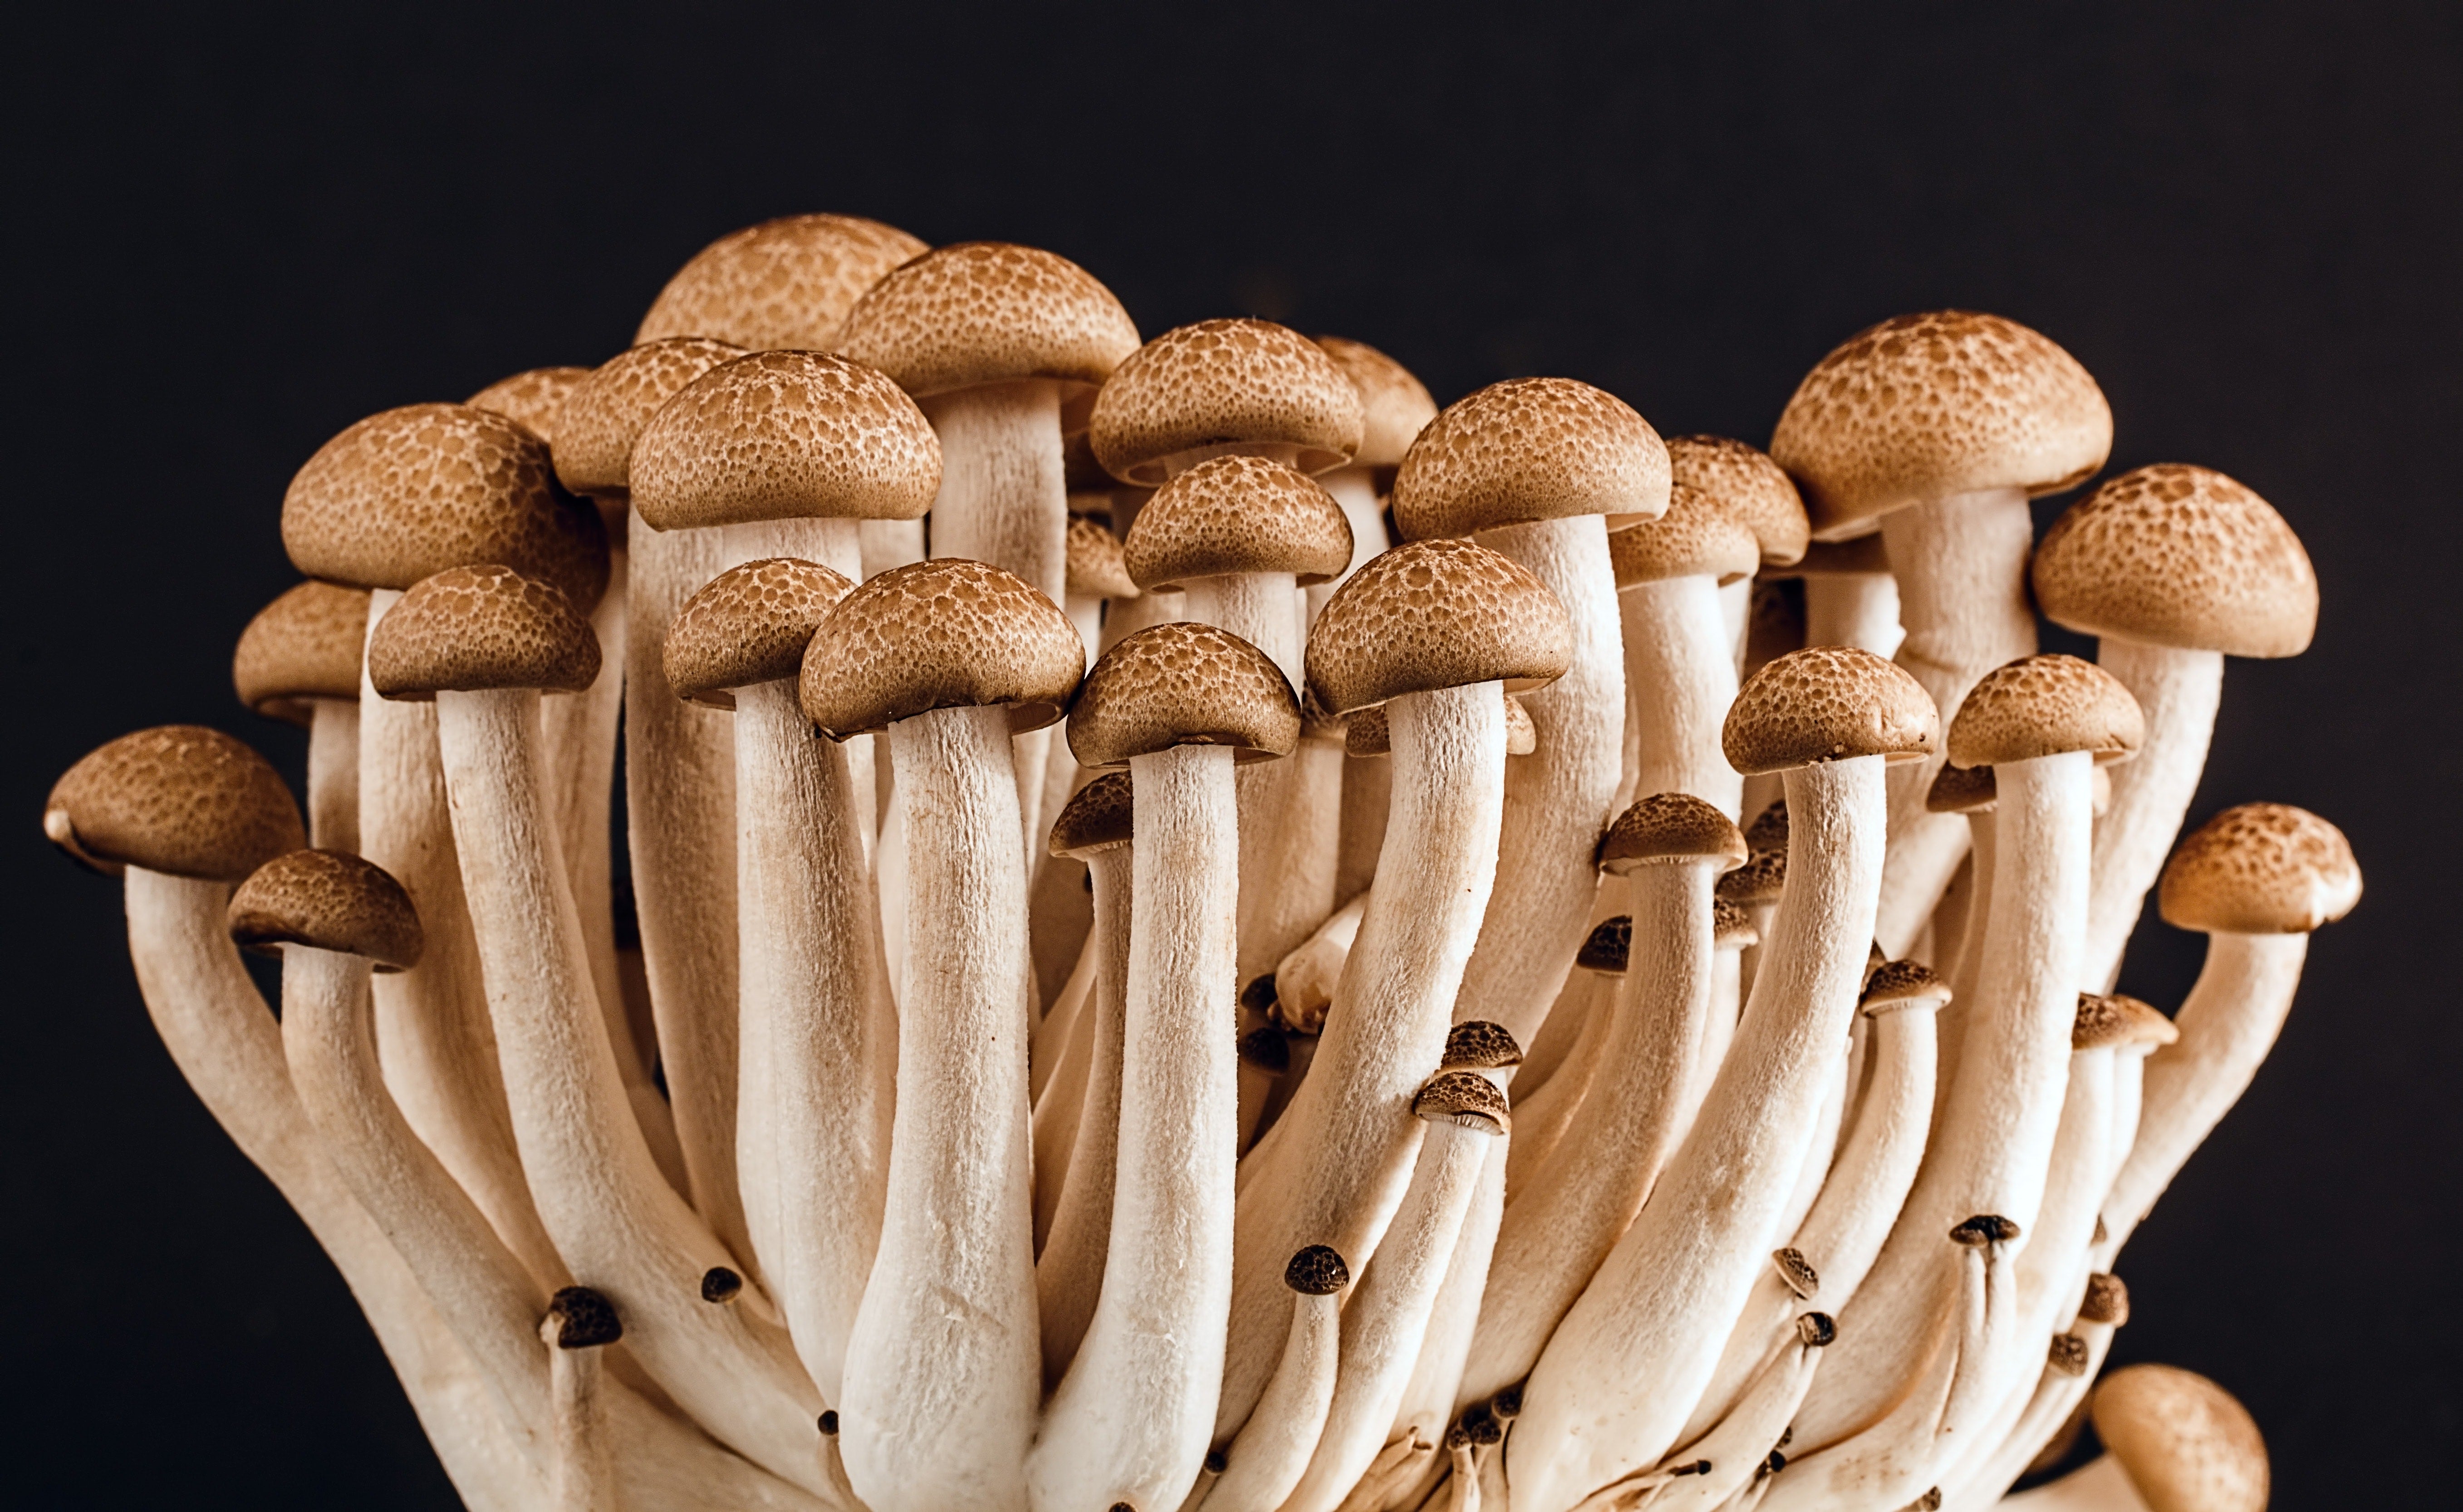 Mushrooms that can help with depression. 